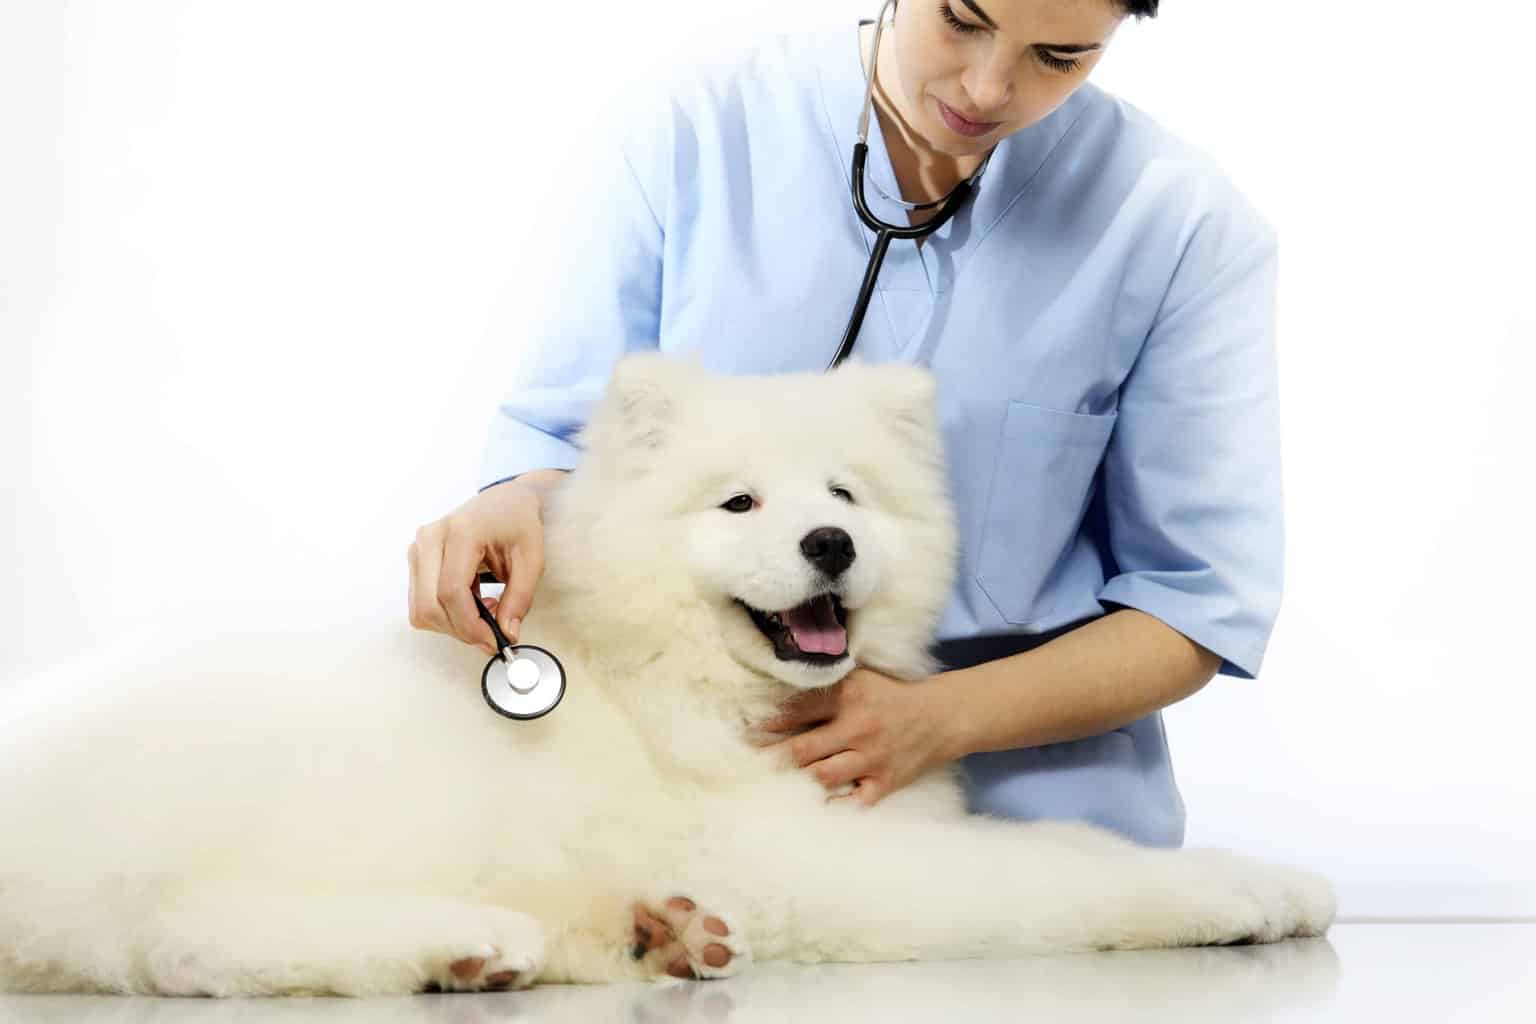 Happy Samoyed at vet's office. Don't go it alone when it comes to your dog's health. Consult the experts and use vet tips to keep your furry friend healthy and happy.